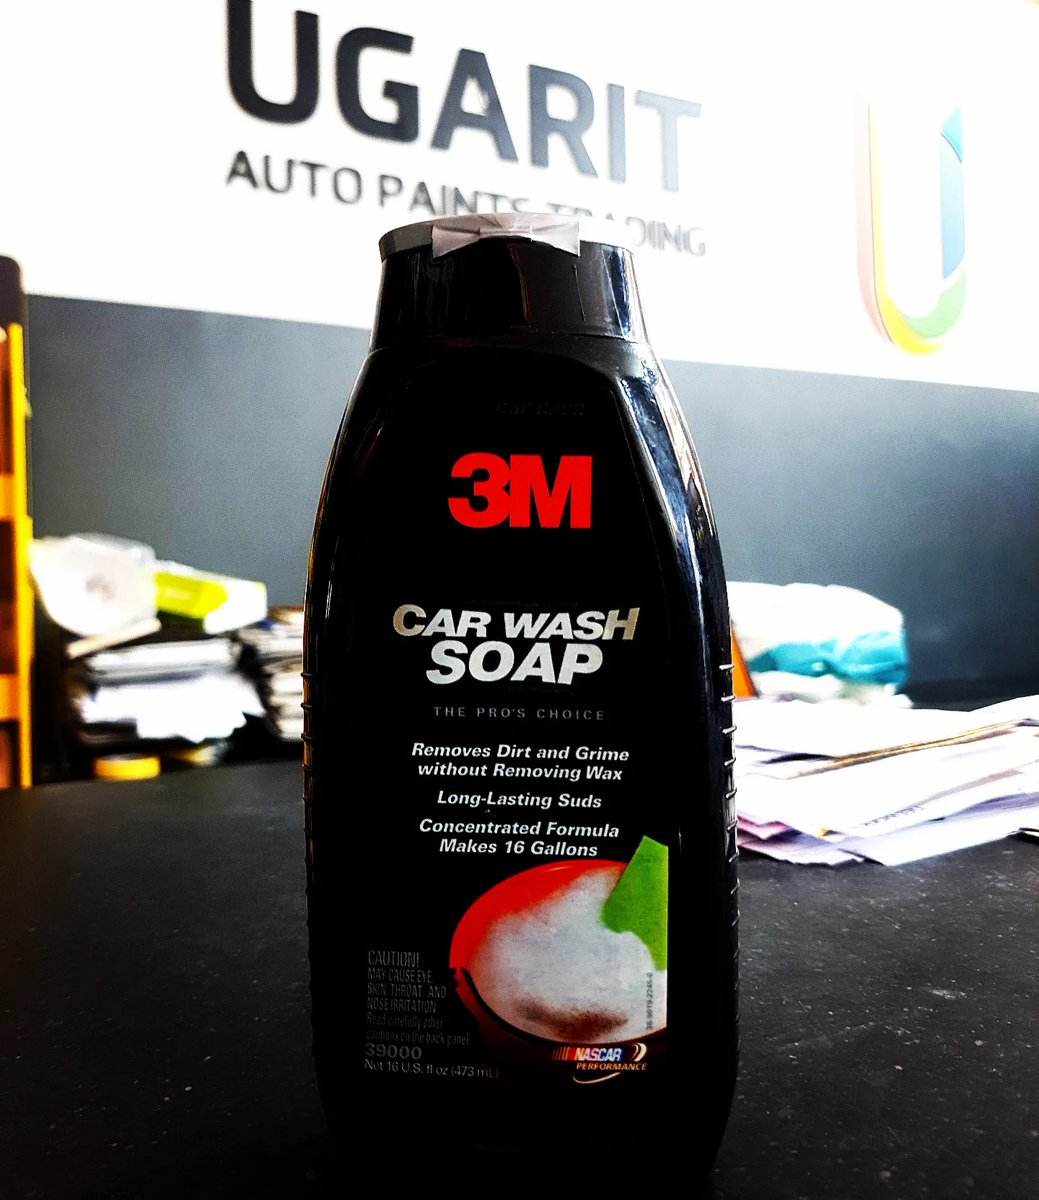 🚗 Keep Your Ride Gleaming with 3M 39000 Car Wash Soap 473ml! 🧼

Experience the ultimate clean with our premium car wash soap! #3MCarWash #CarWashSoap #CarCleaning #CarDetailing #AutoDetailing #CarCare #CarMaintenance #UAEAuto #CarEnthusiasts #AutomotiveCare #PremiumCarCare